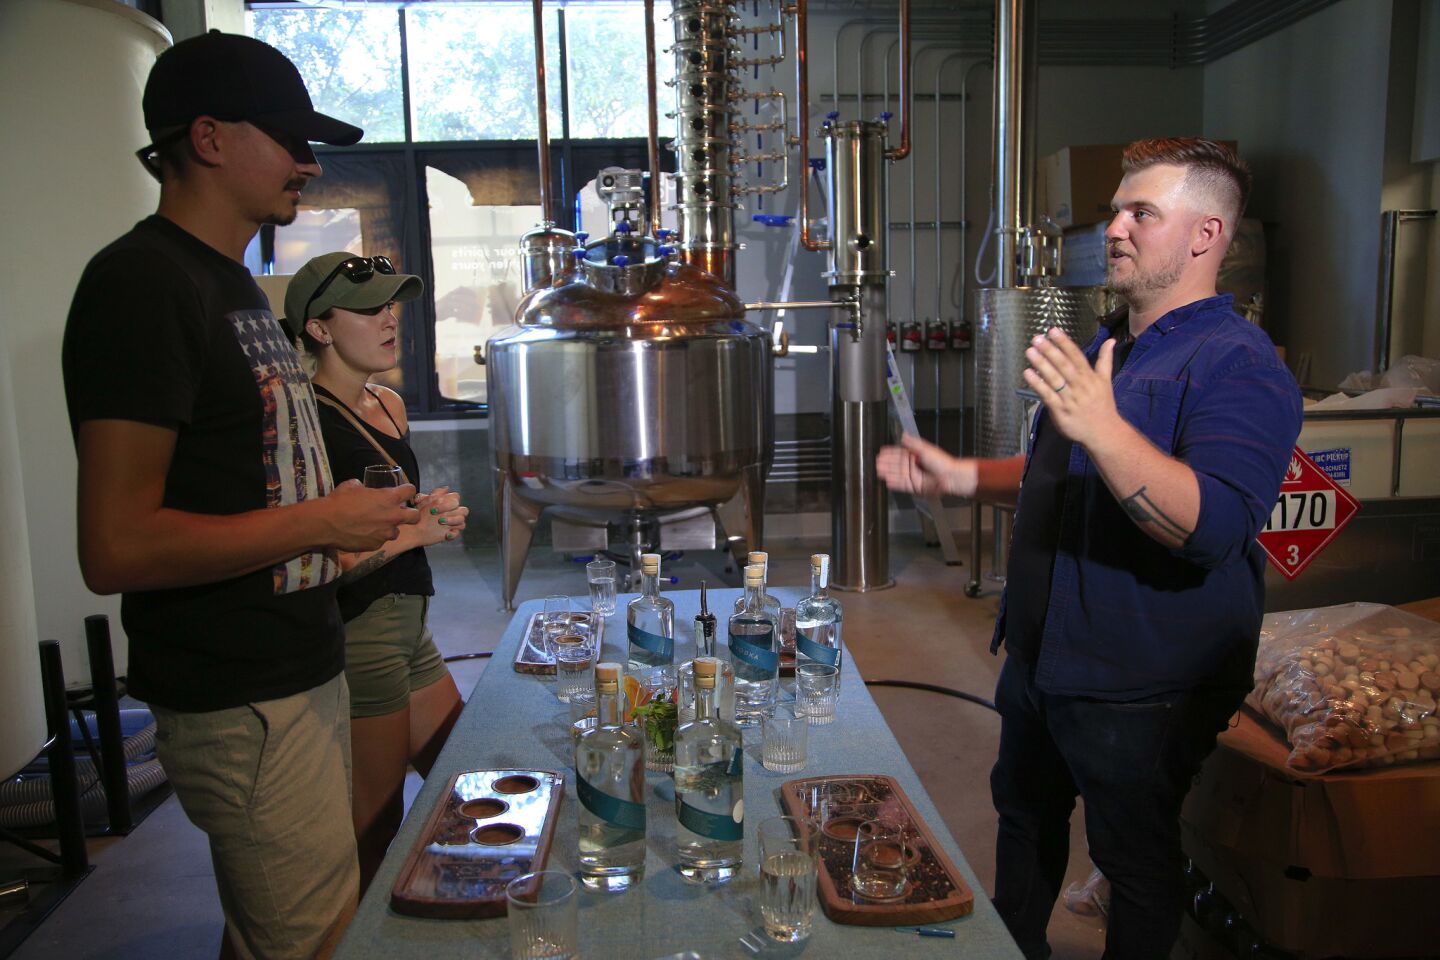 You & Yours Distilling Co.